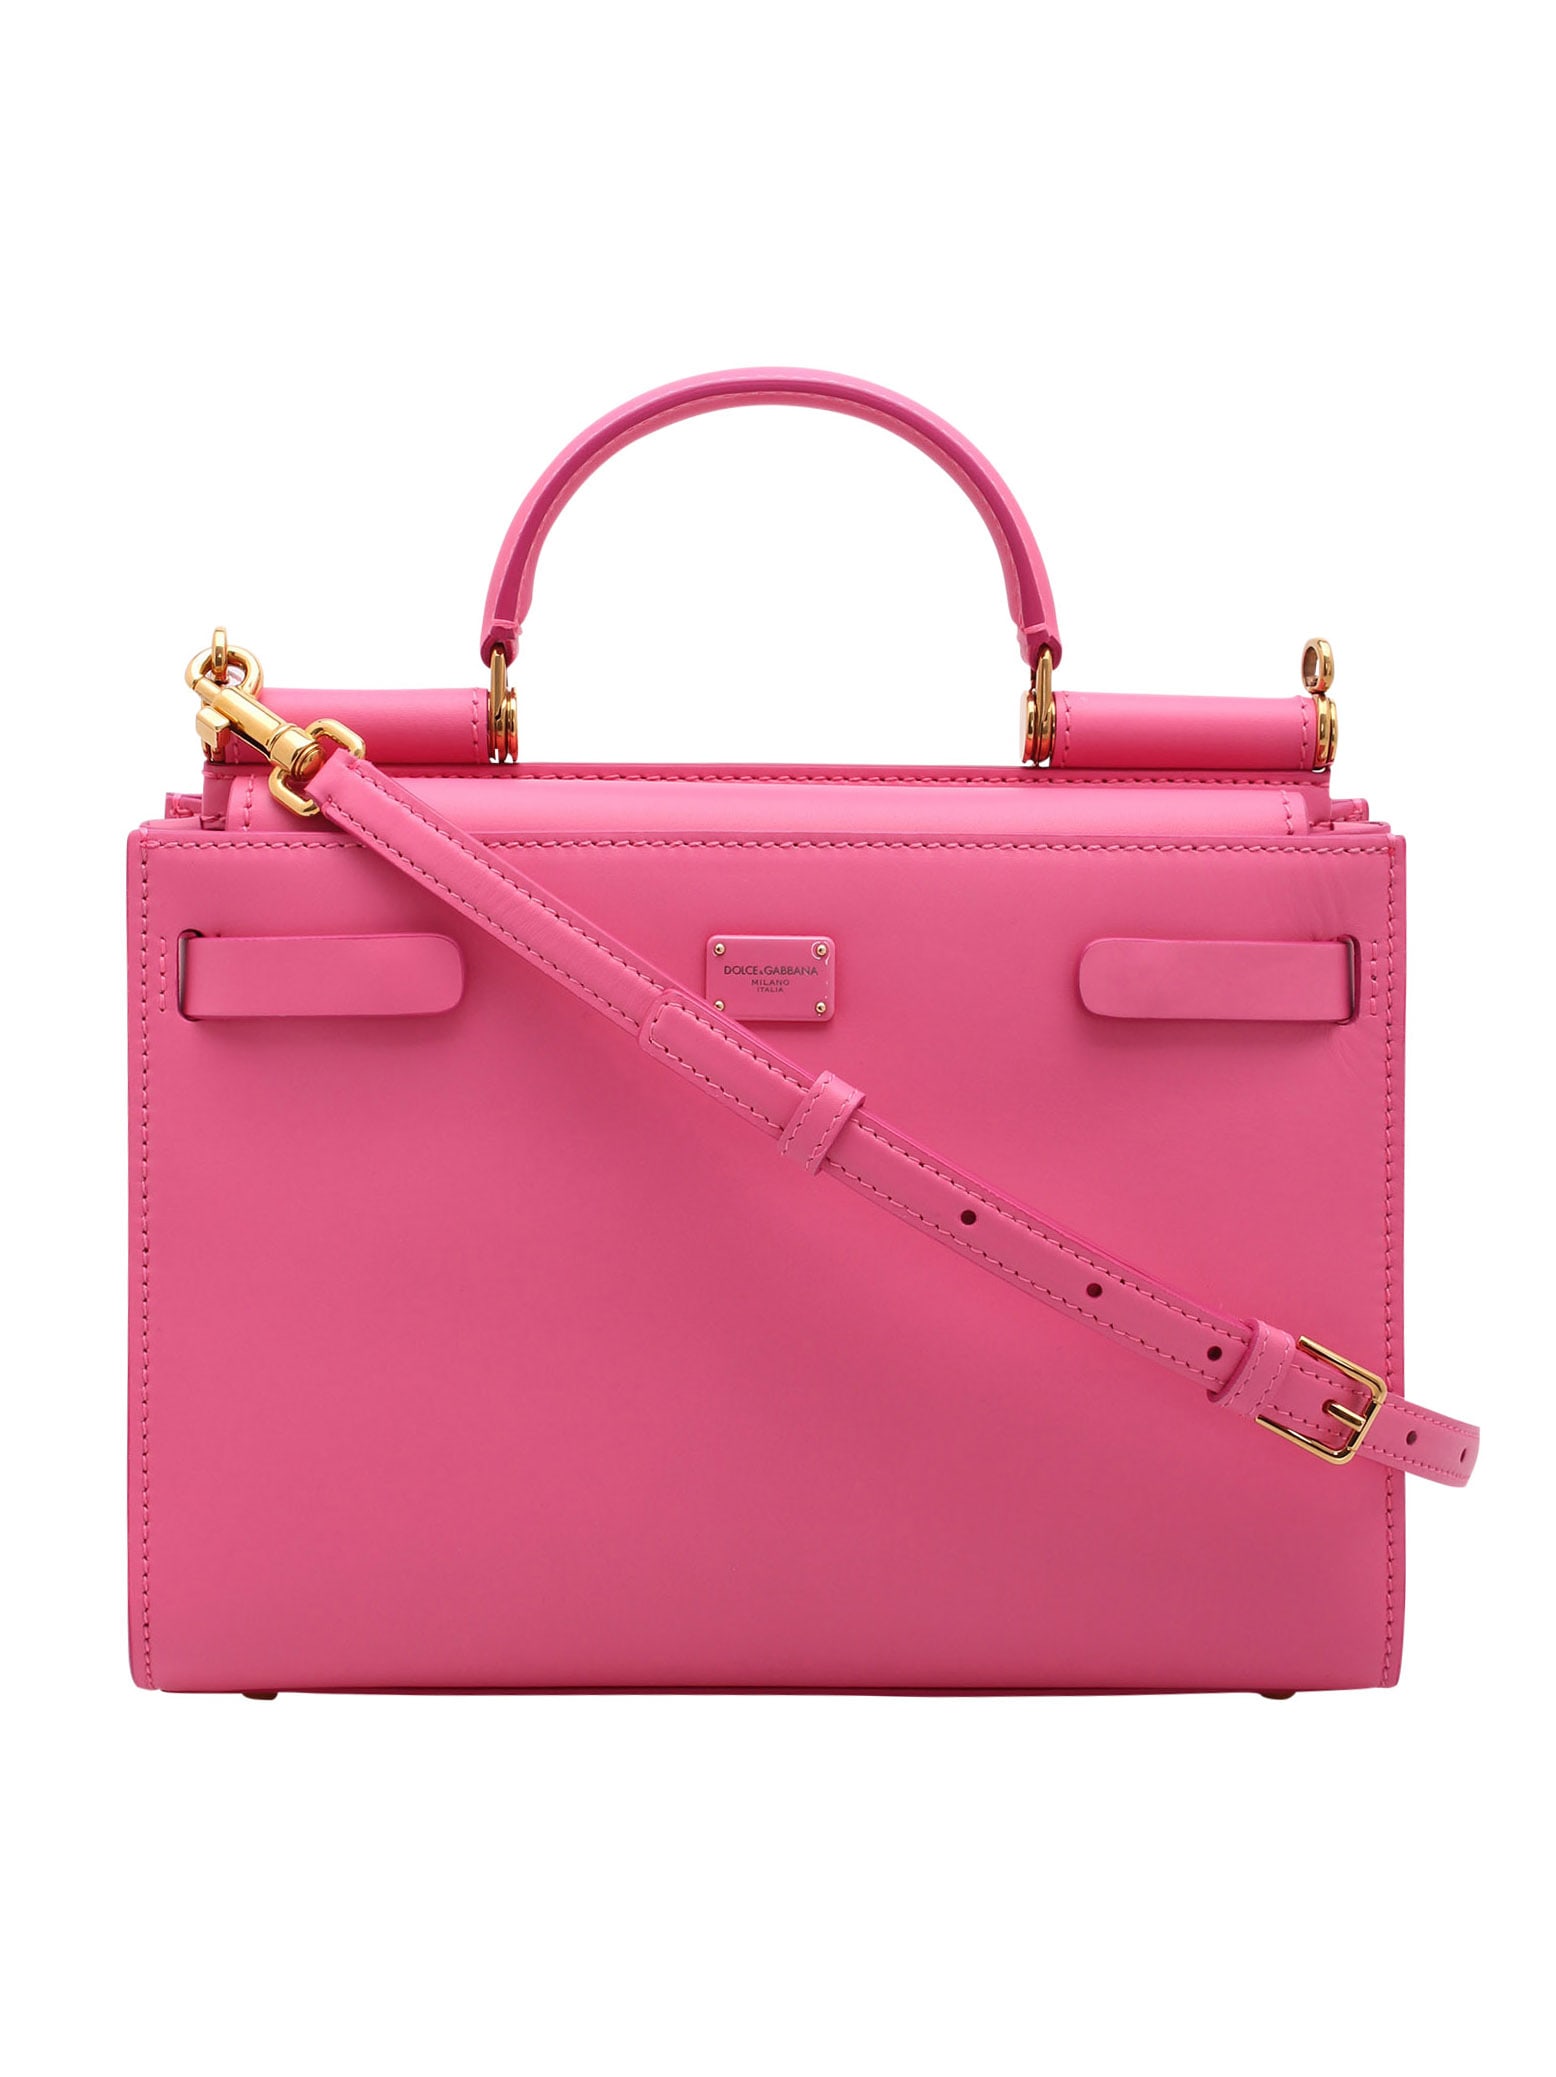 Dolce & Gabbana Leather Bag In Pink